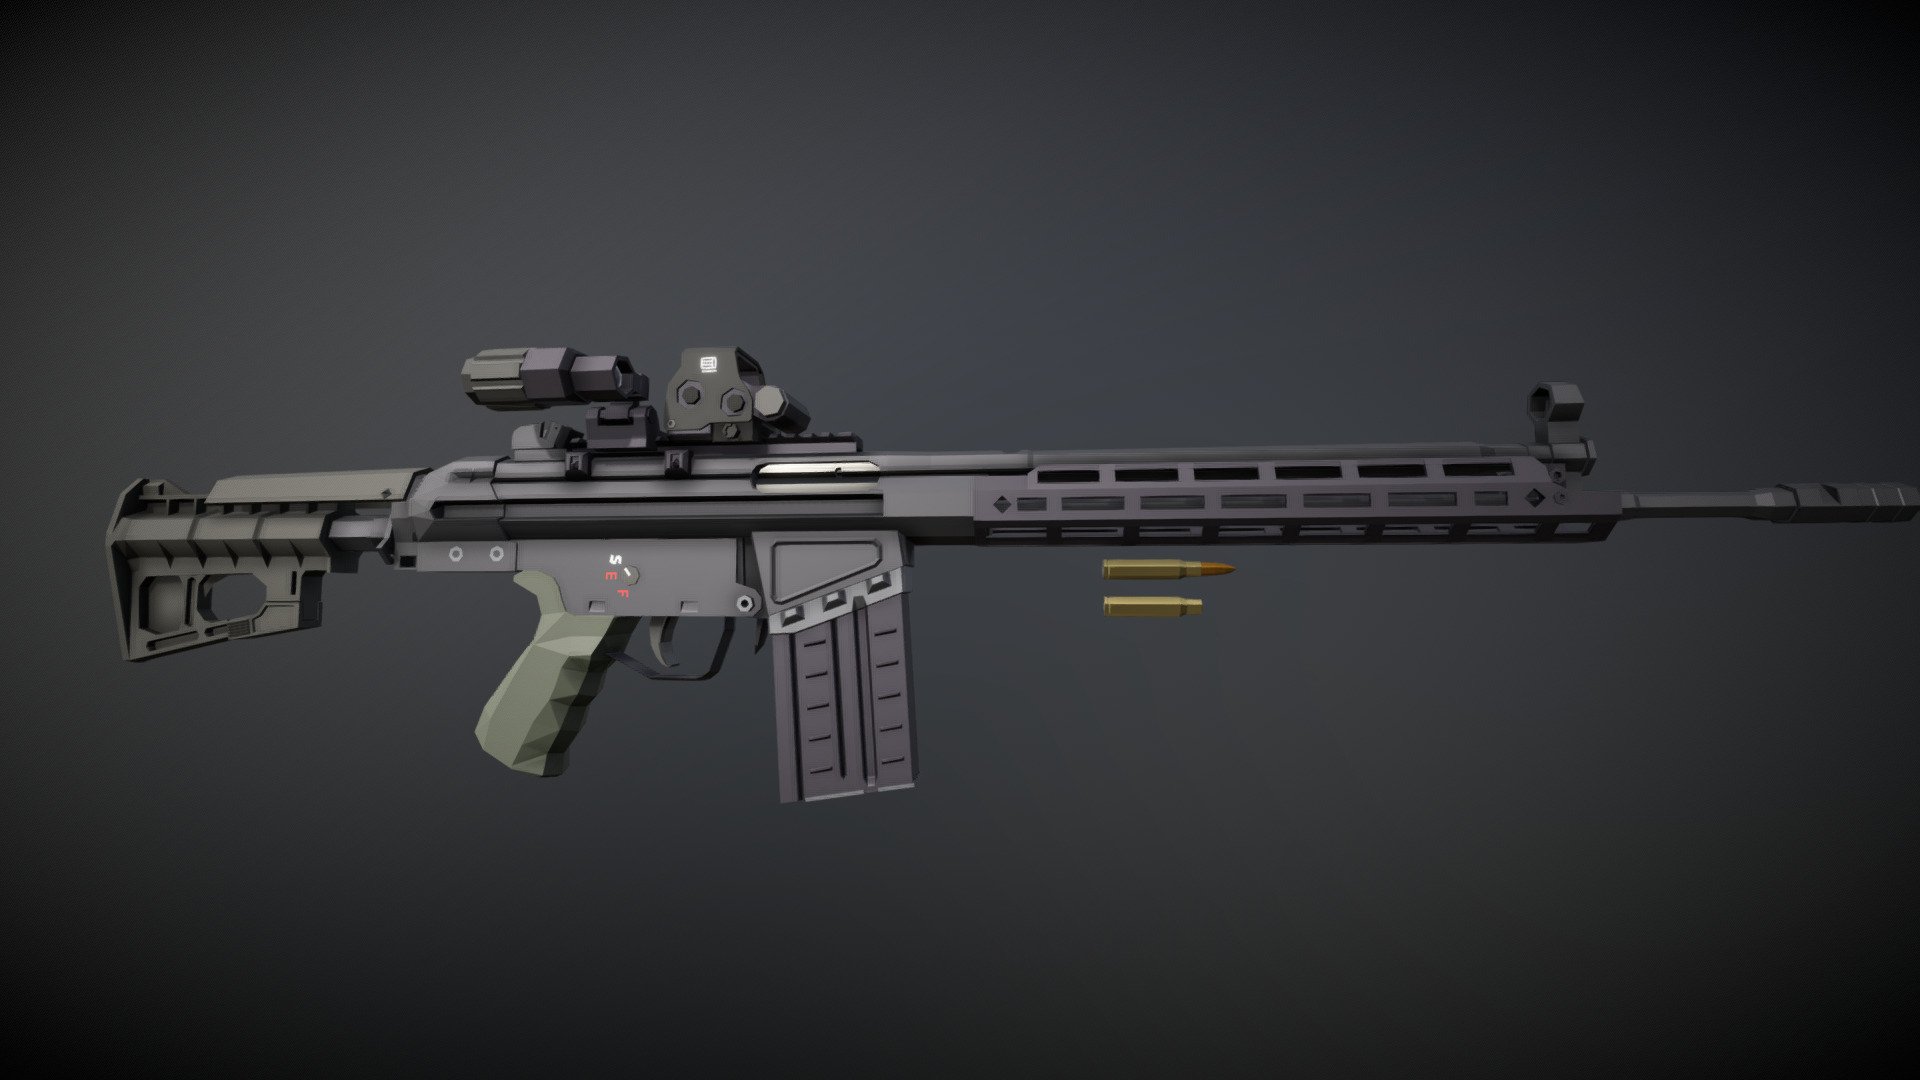 The H&amp;K G3 I previously made, but with a modernized adjustable stock, M-LOK handguard and a holographic sight-magnifier combination mounted on a receiver rail mount

I may or may not upload some M-LOK attachments in the near future - Low-Poly Modernized G3 - Download Free 3D model by notcplkerry 3d model